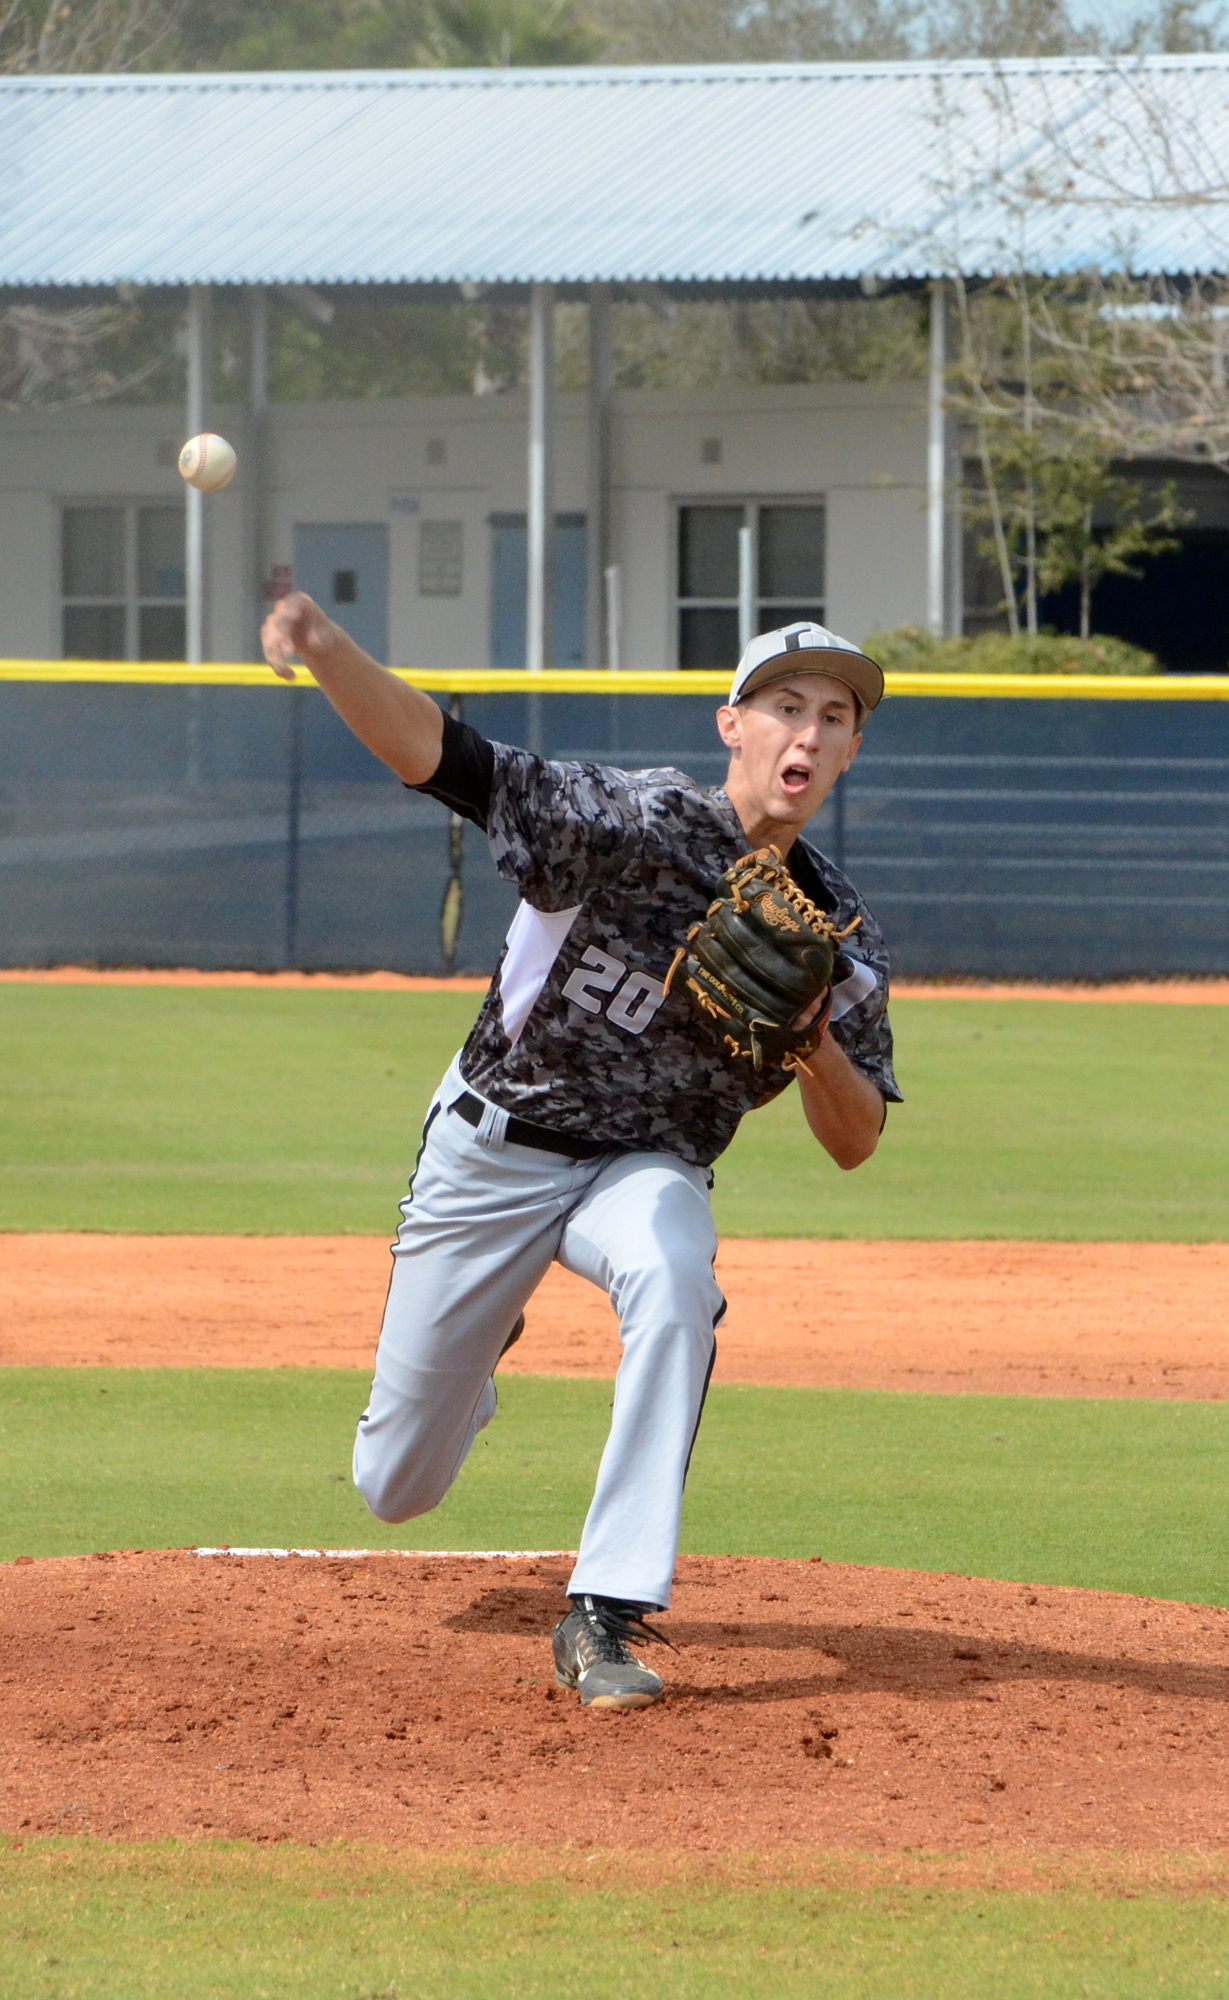 Aaron Bogovic has pitched well for Olympia this spring, including a perfect game against Wekiva Feb. 26.